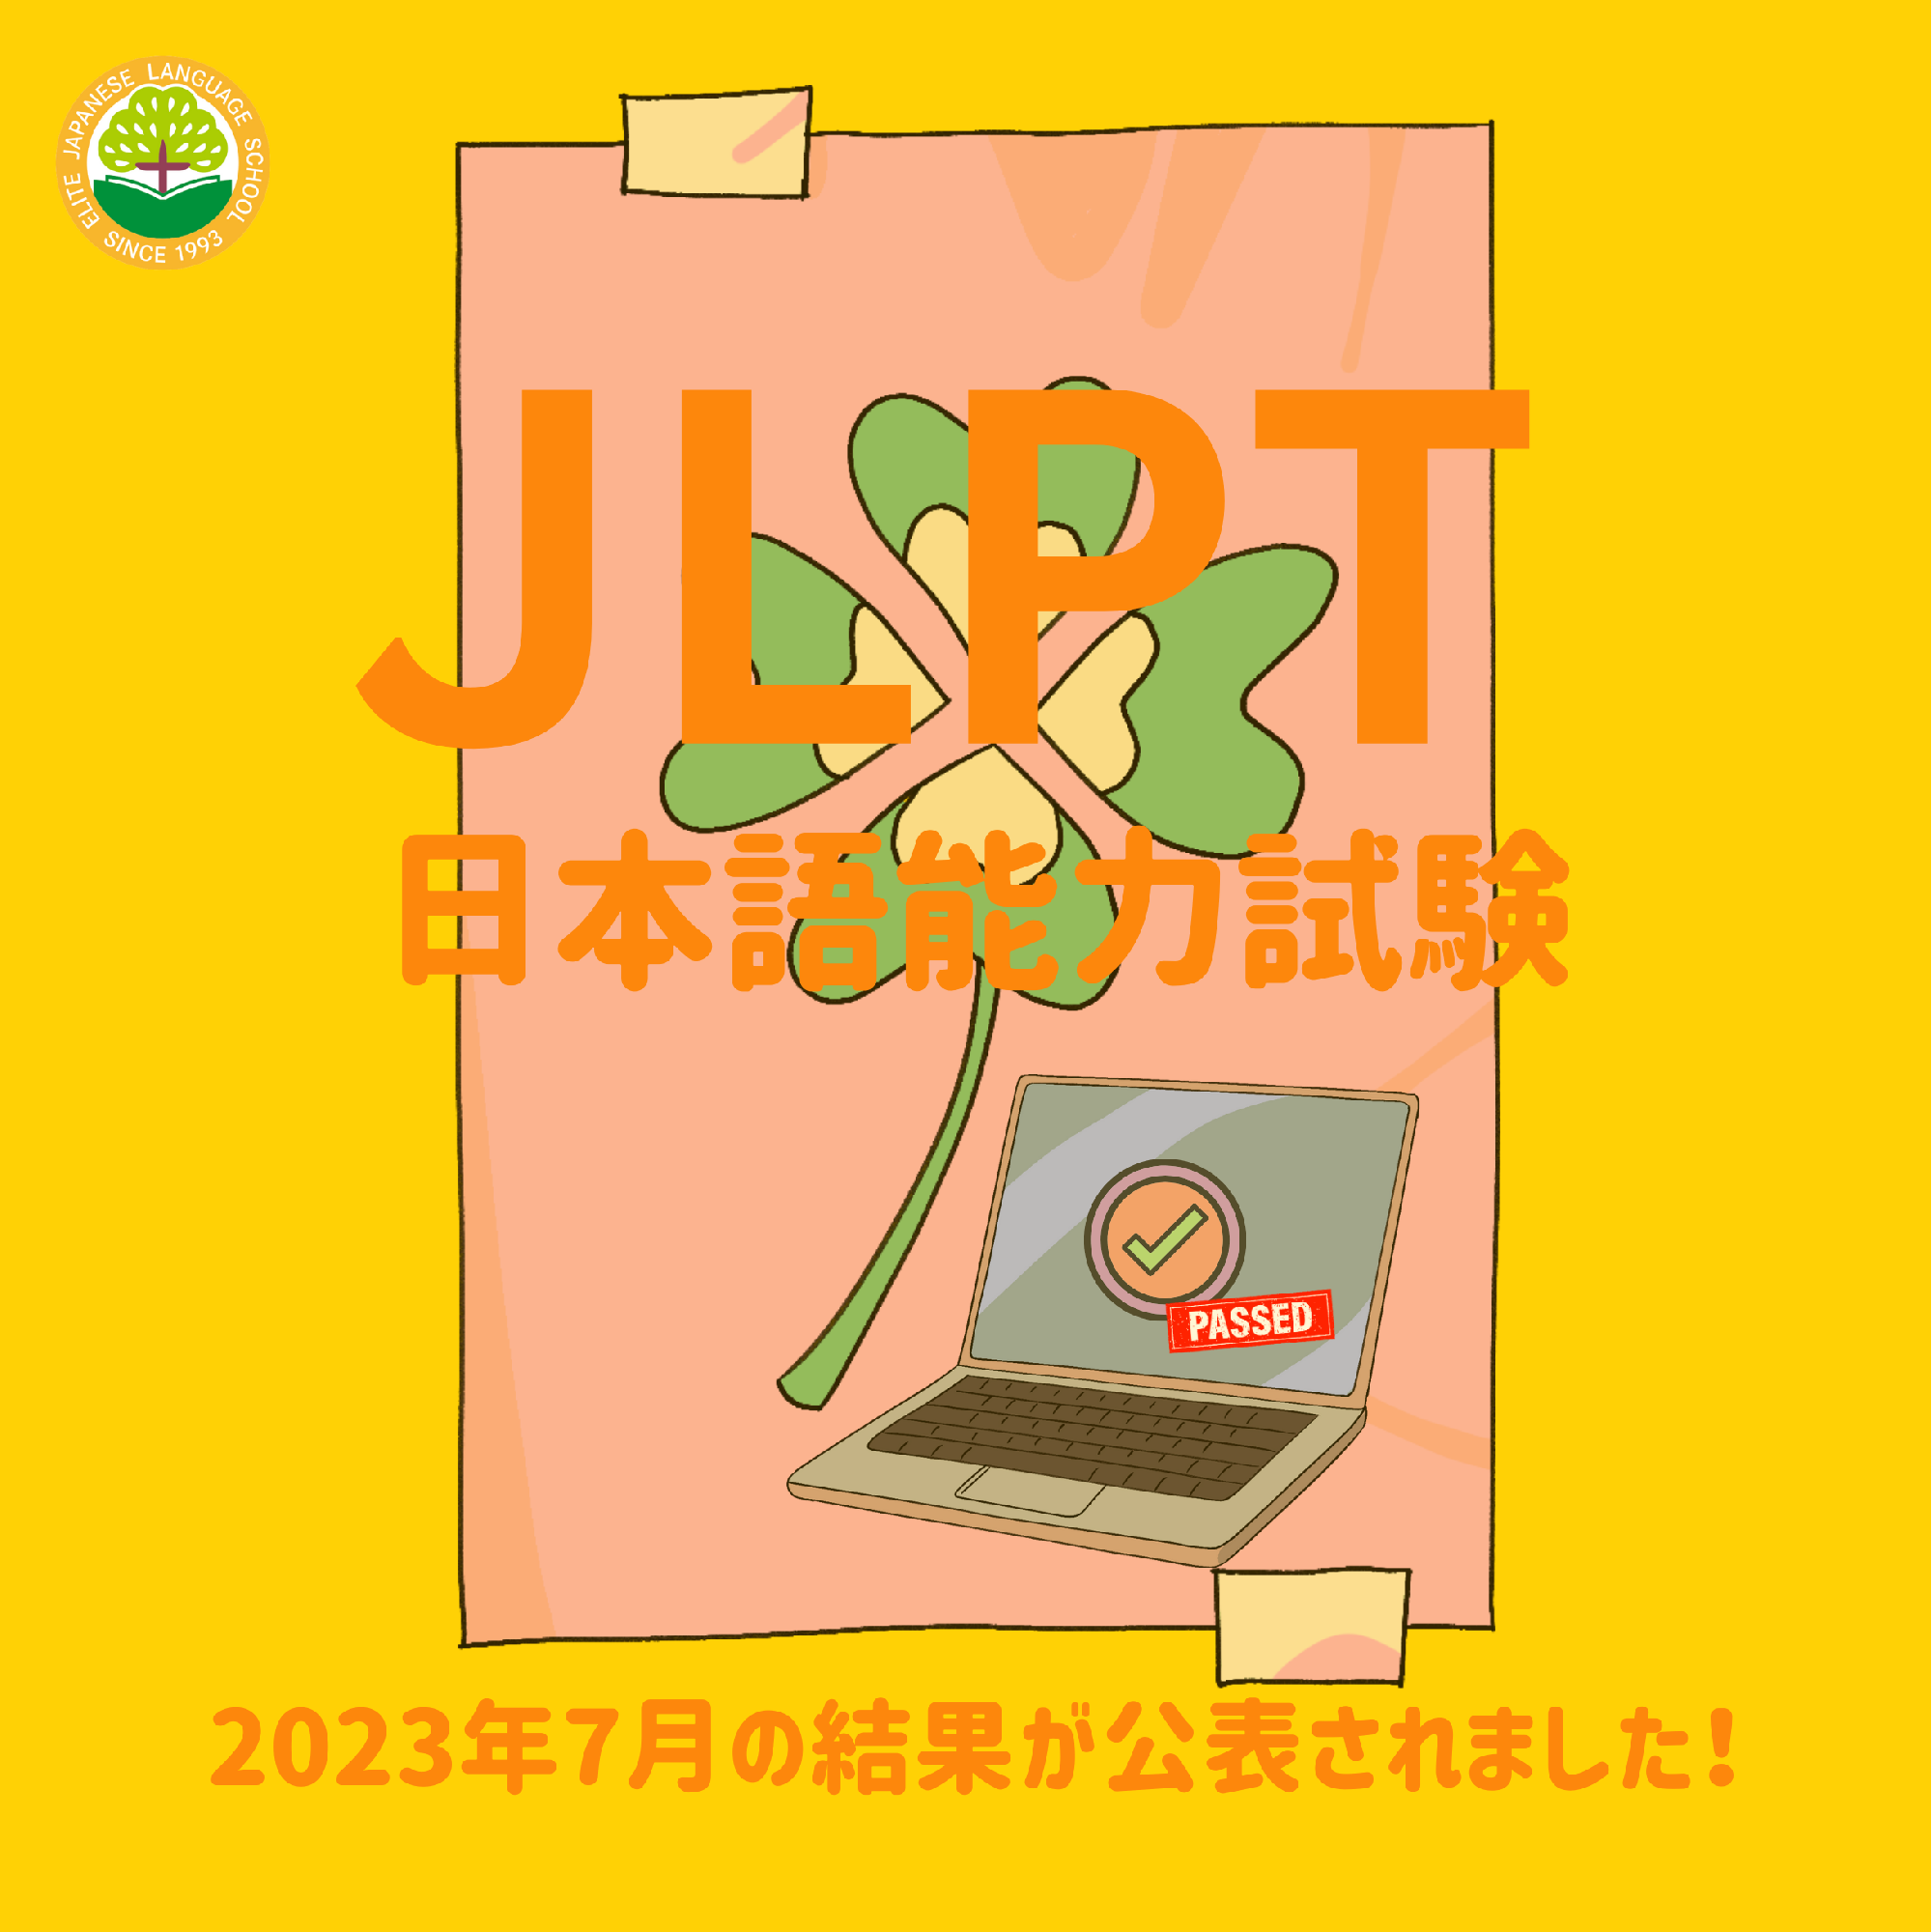 The JLPT results are now available!